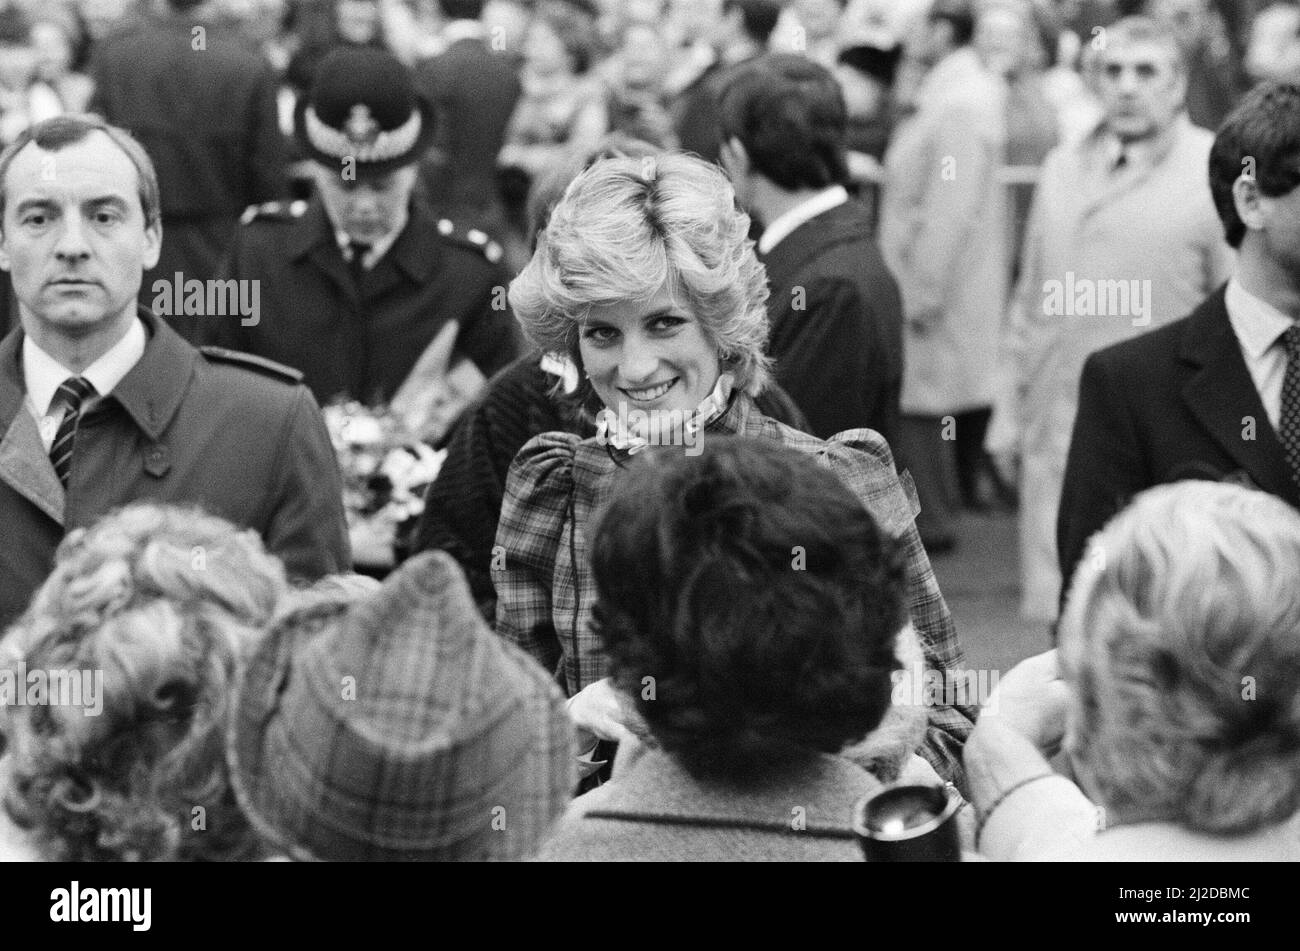 The Prince and Princess of Wales visit Mid Glamorgan in Wales.On this visit, they meet the local well-wishers outside a newly electronics plant.  Picture shows Princess Diana and behind her, her bodyguard Barry Mannakee wearing a diagonal striped tie and overcoat/mac.  See other frames in this set wear Mr Mannakee has taken this coat off and is wearing a slight pin striped suit.   Picture taken 29th January 1985 Stock Photo